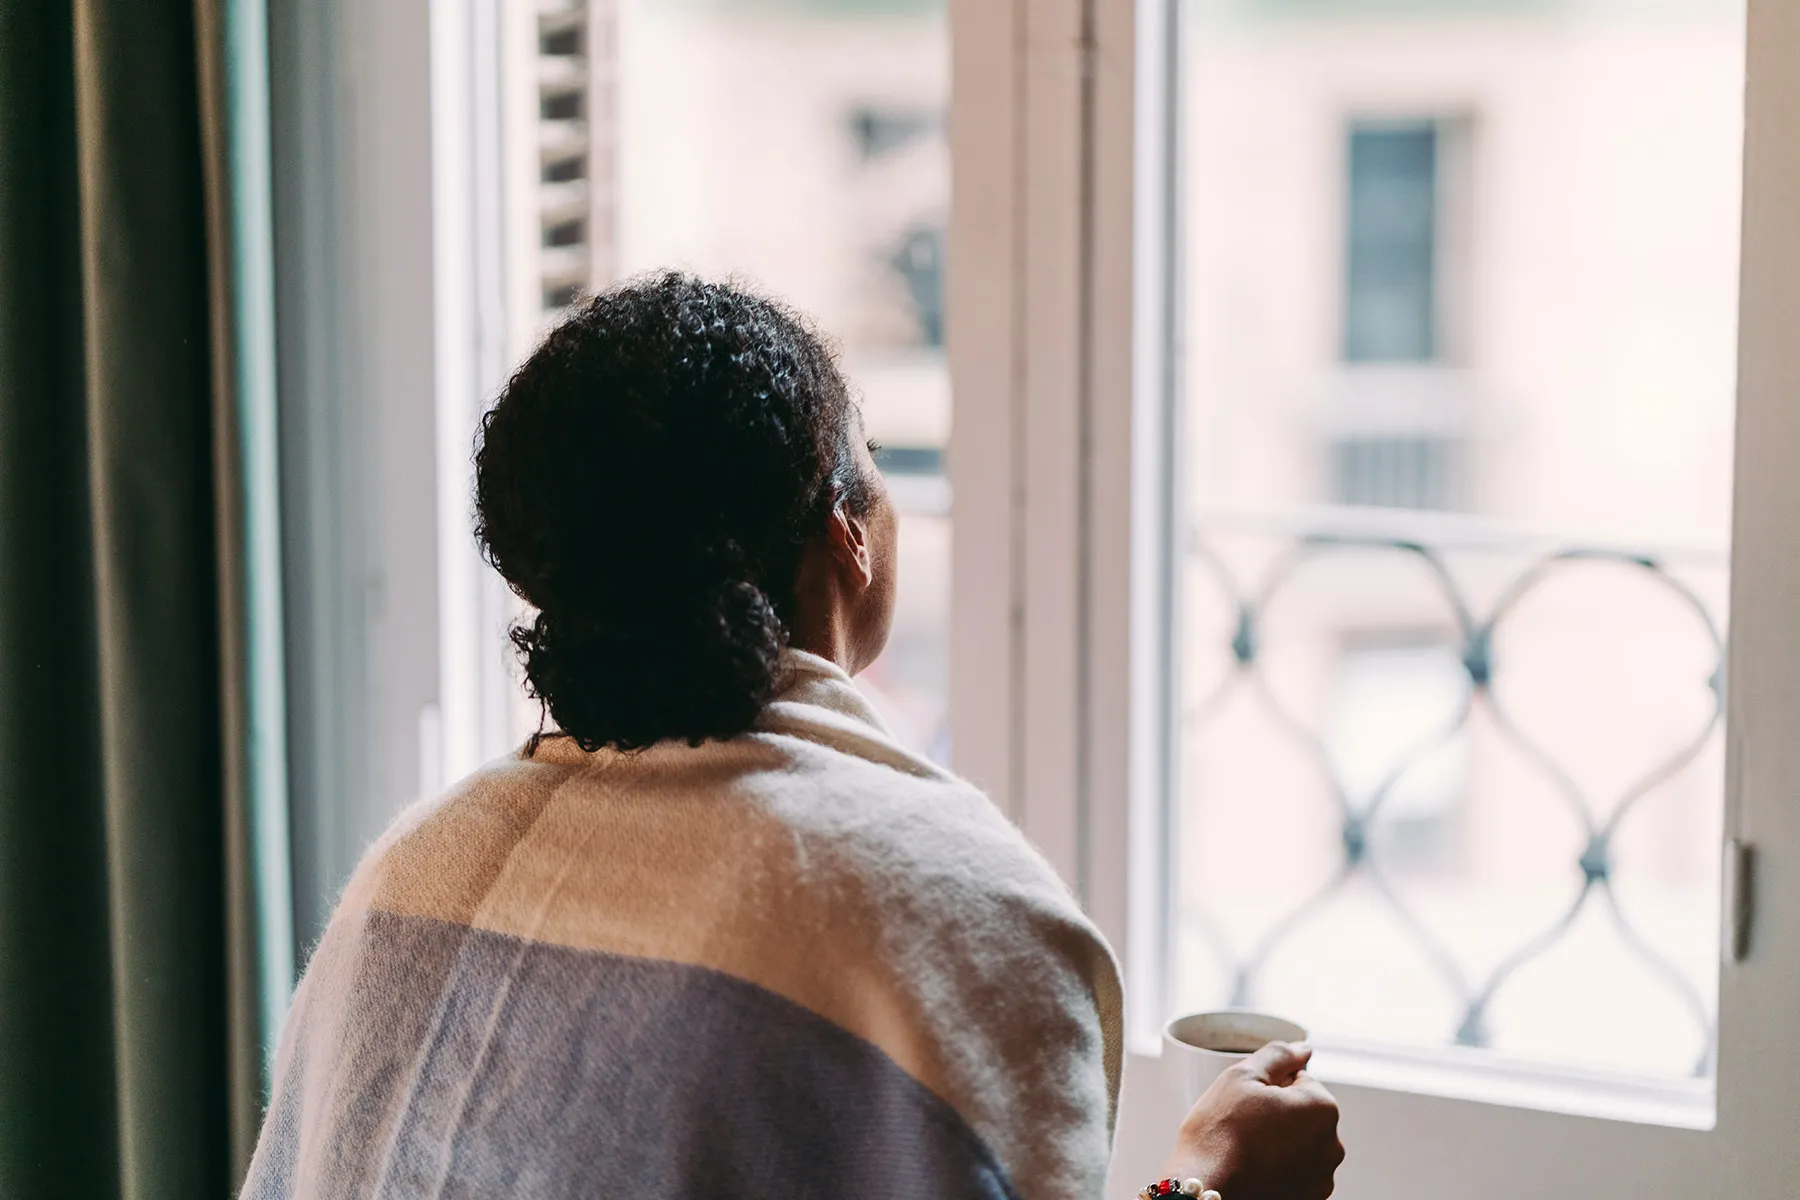 photo of woman looking out window